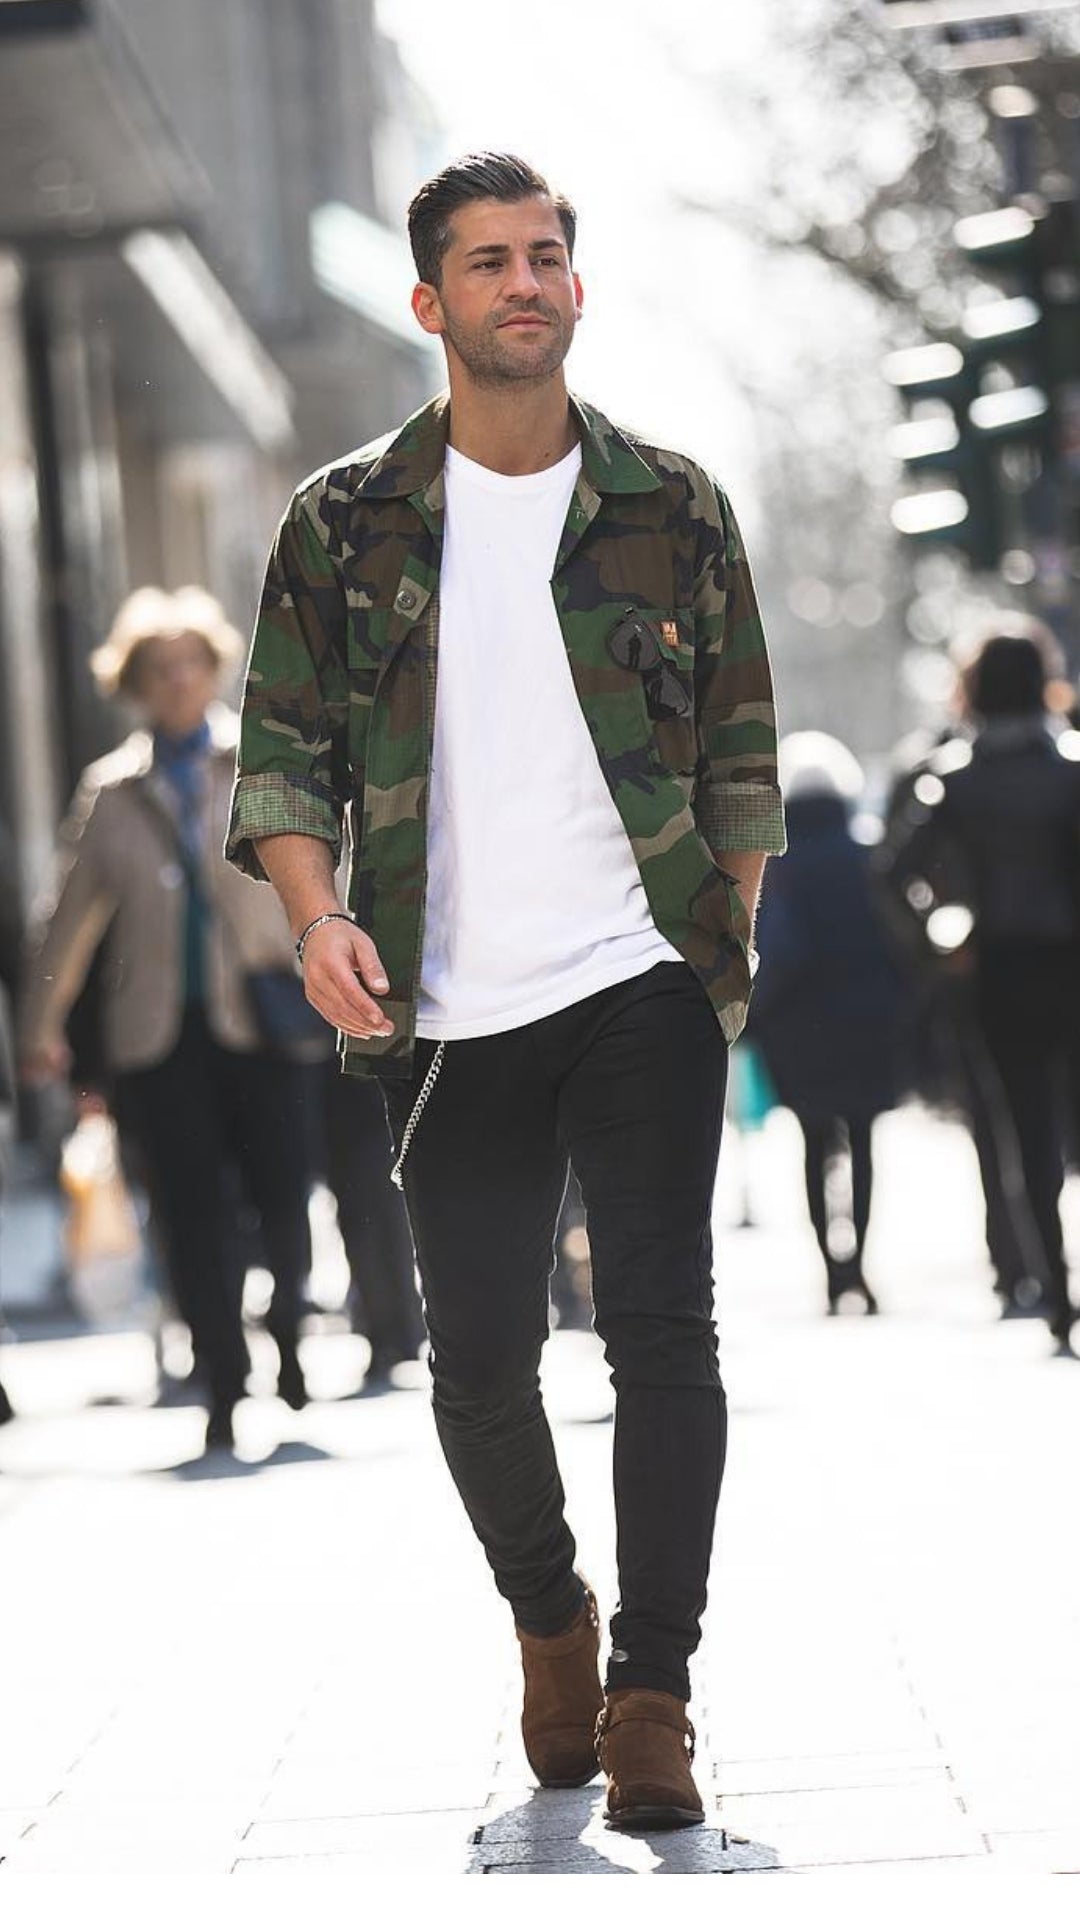 5 Epic Outfits We Bookmarked From This Celeb's Instagram Account #street #style #mens #fashion